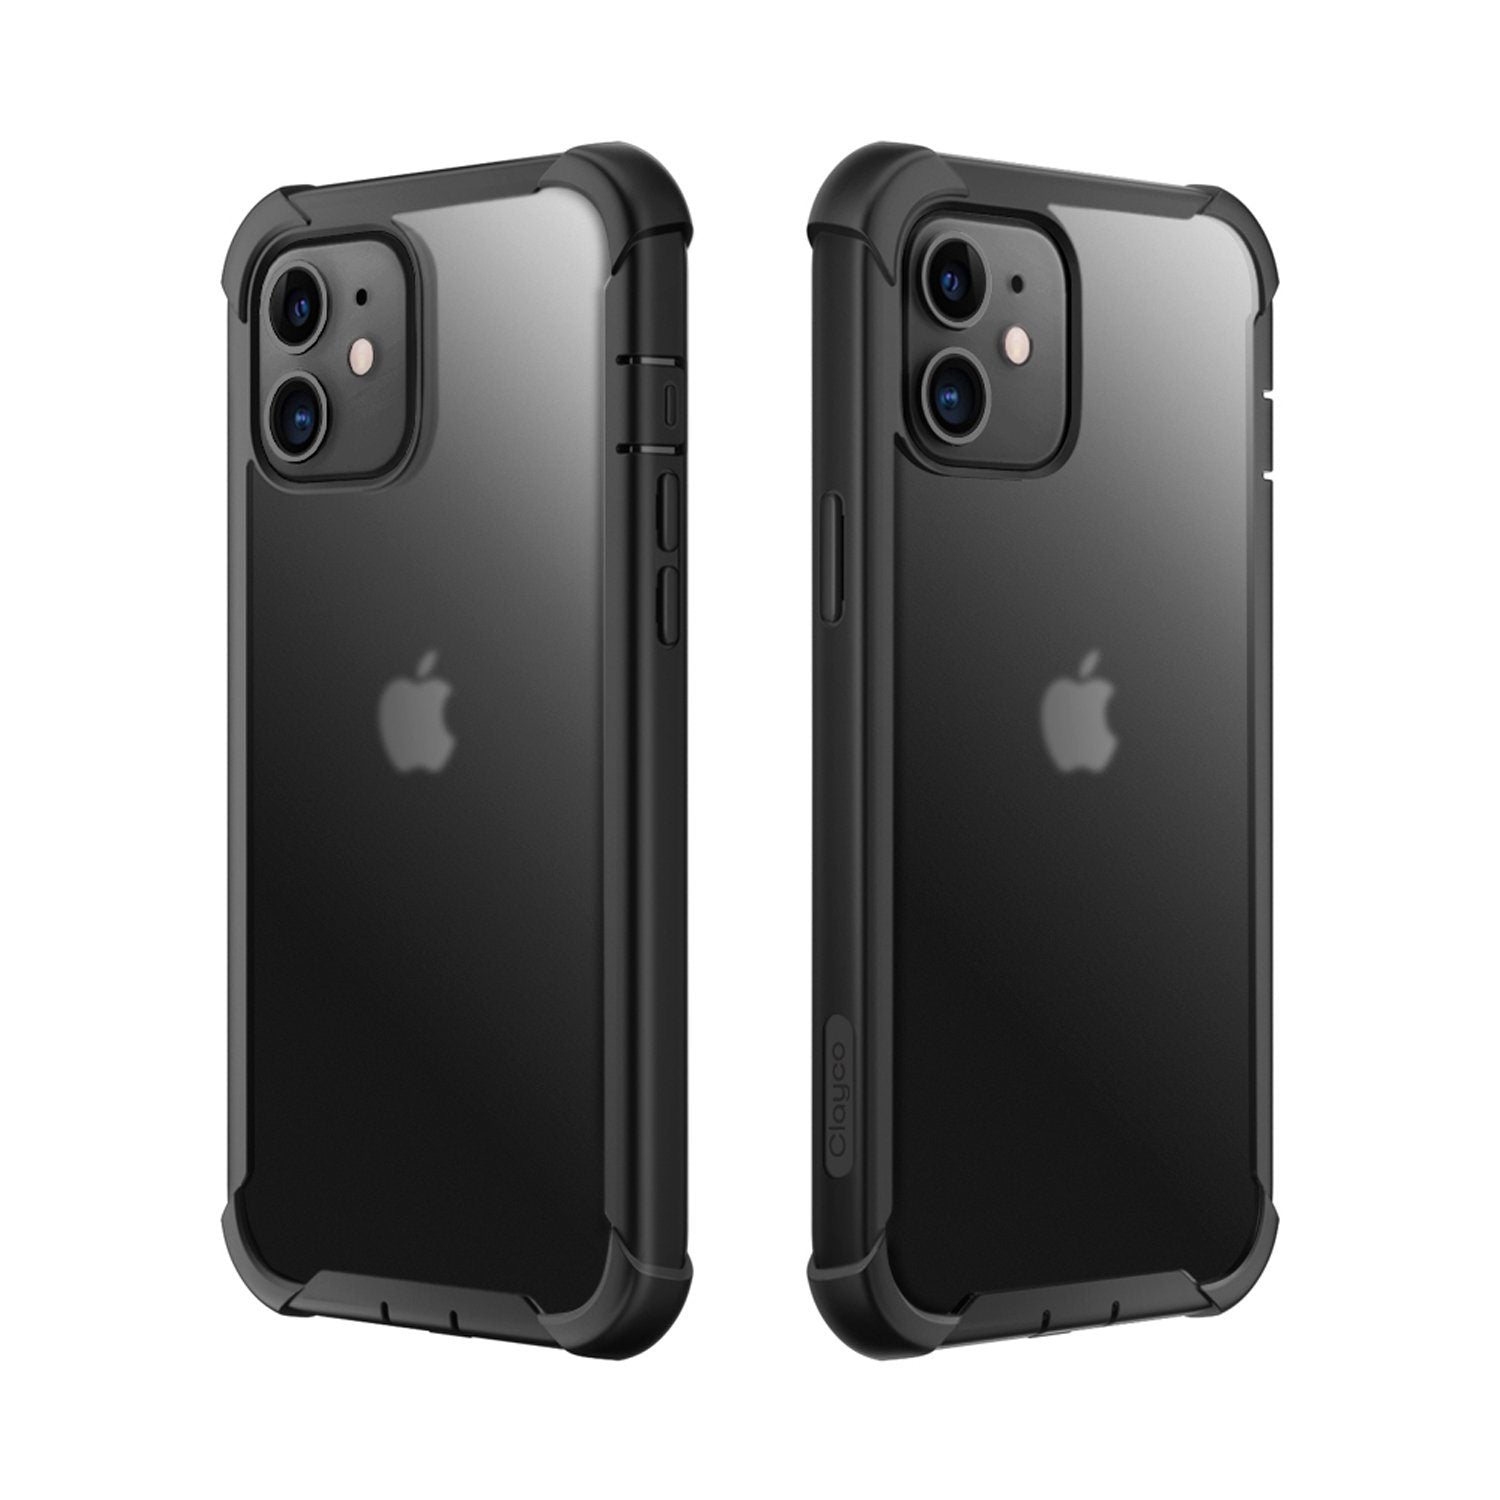 Clayco Forza Series Case for iPhone 12/12 Pro 6.1"(2020) with Built-in Screen Protector, Black Default Clayco 